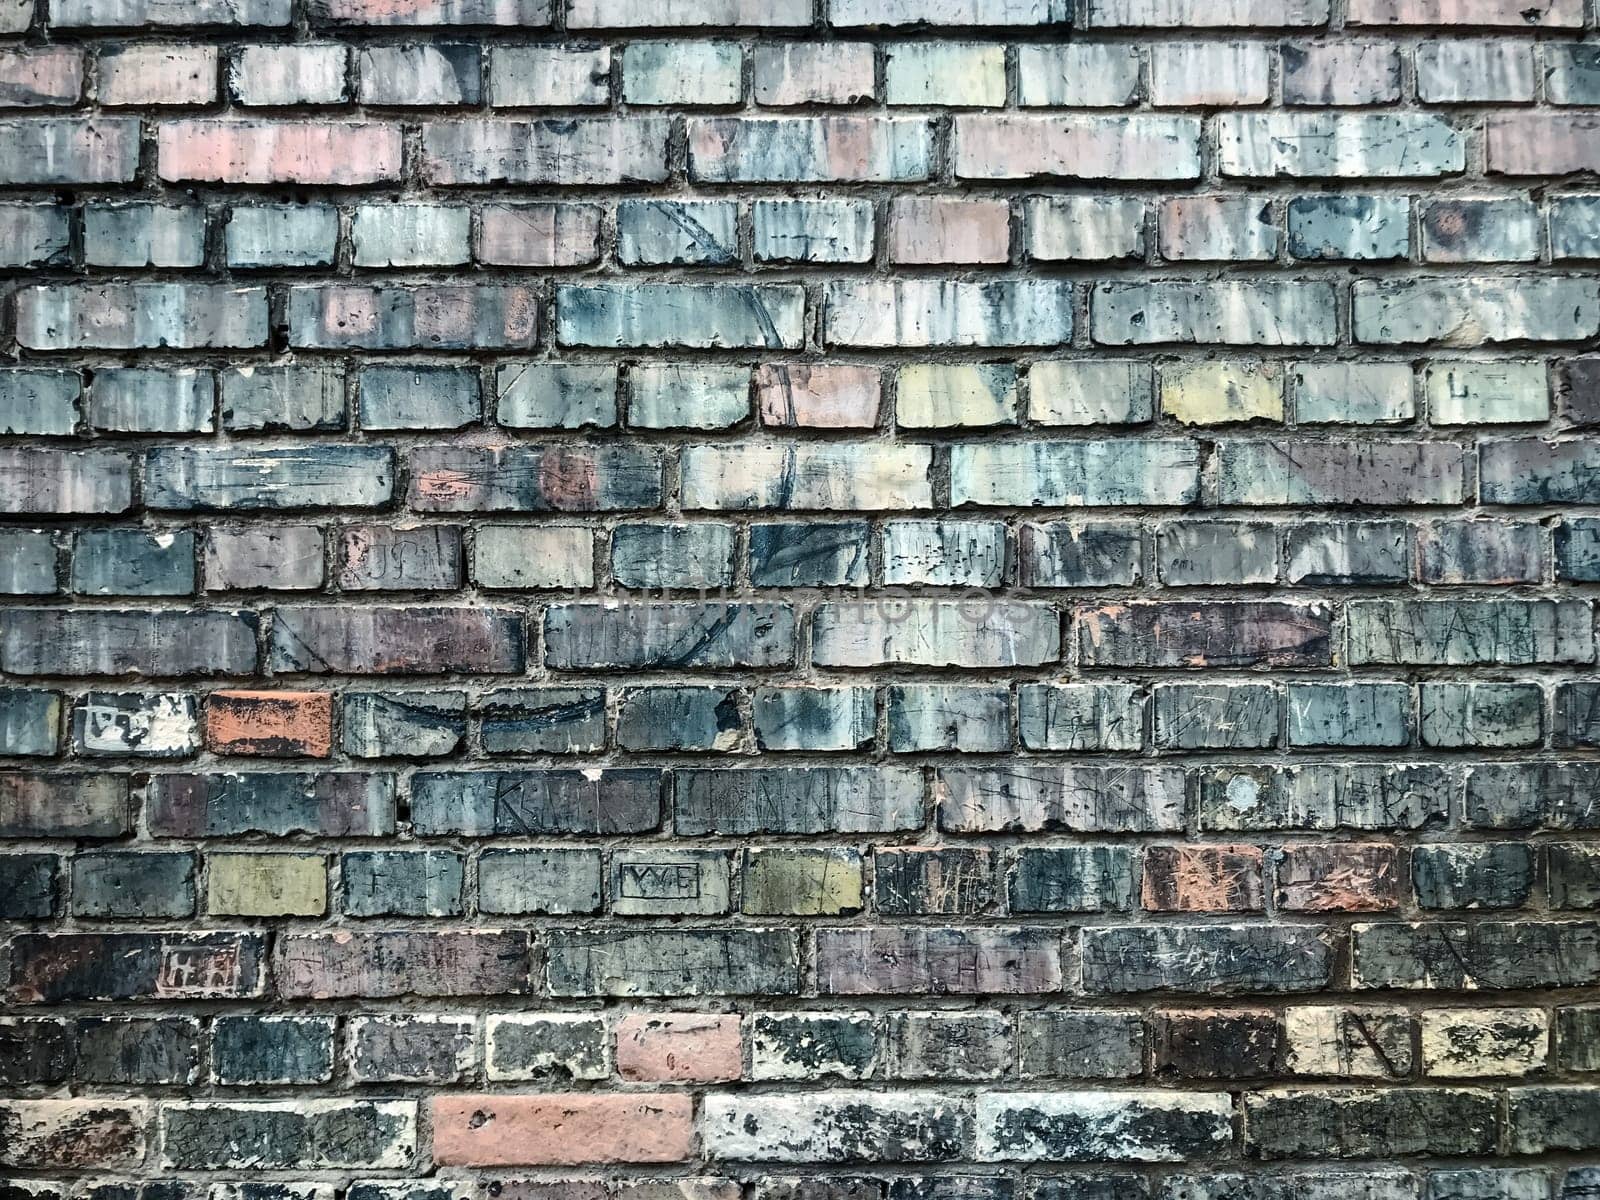 A brick wall with a blue and pink color by Alla_Morozova93